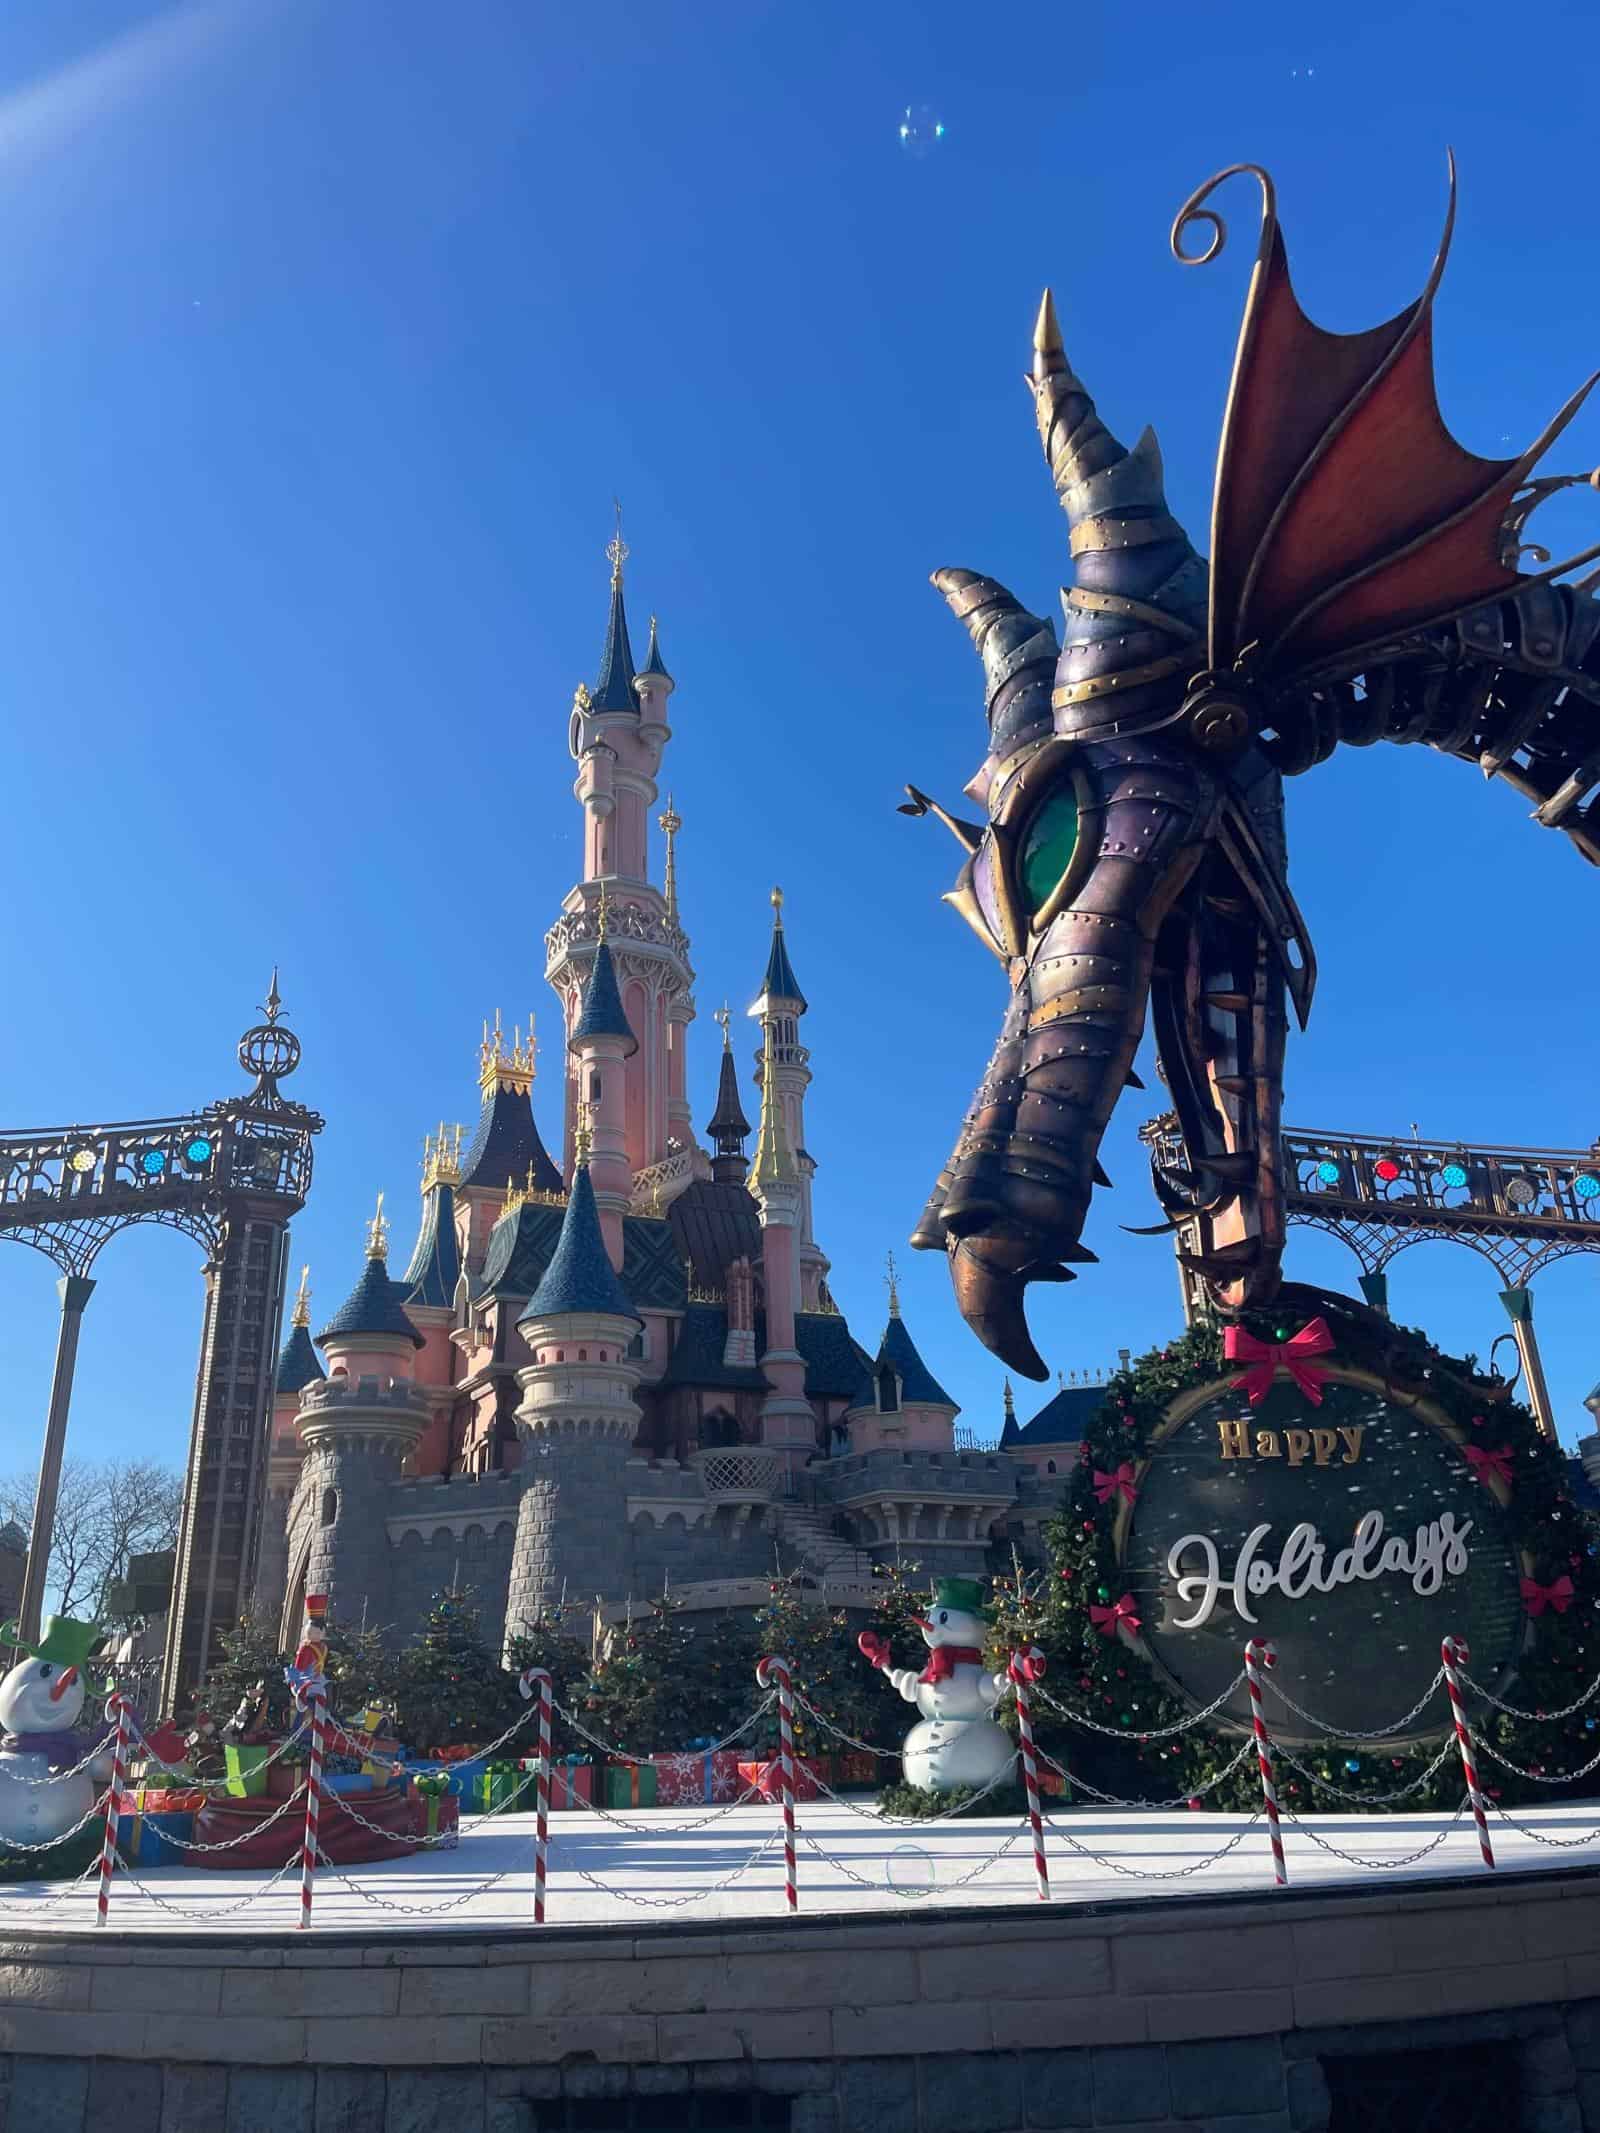 Dragon parade float with disneyland paris castle in background